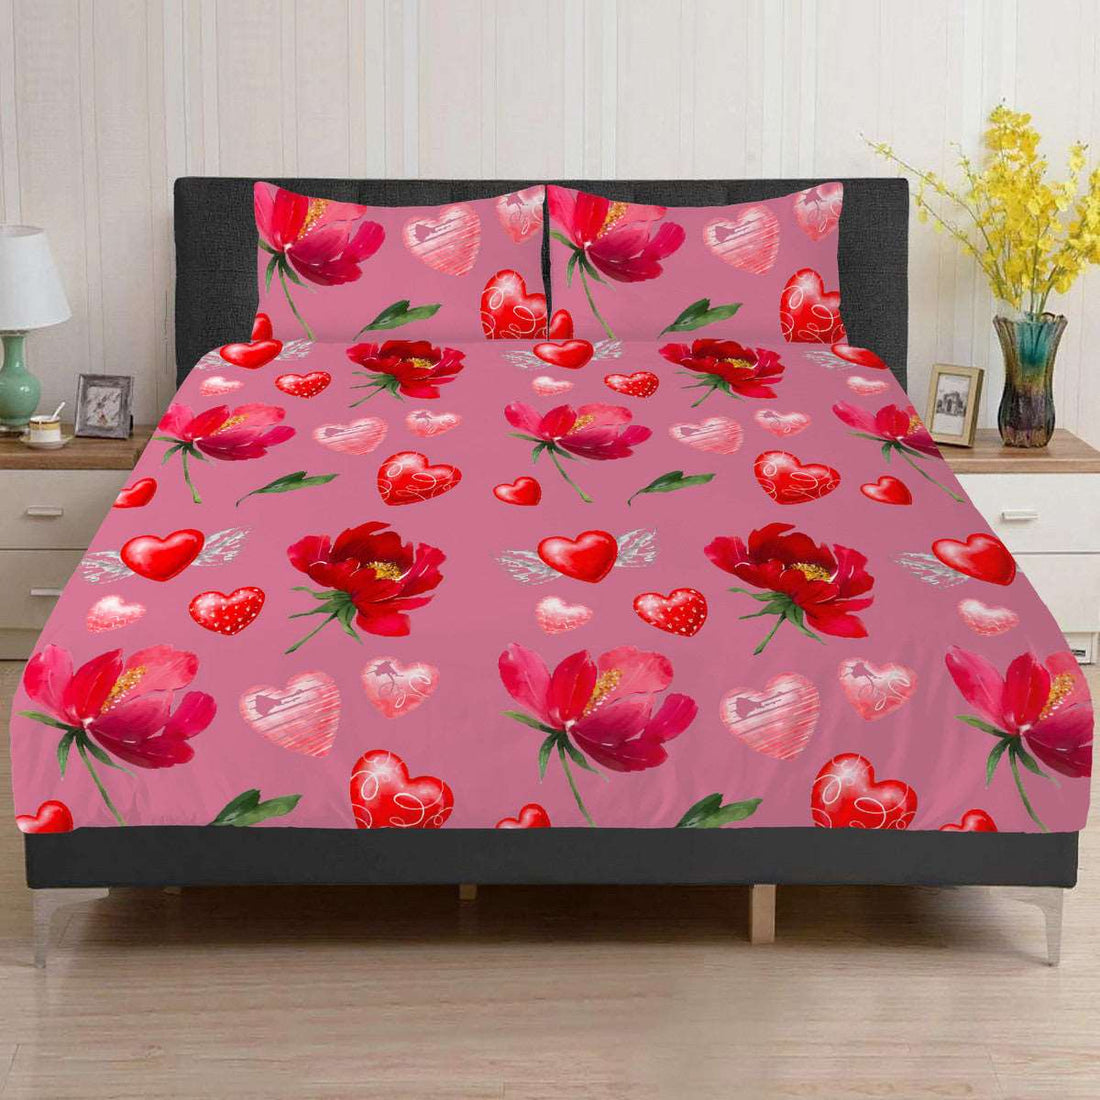 Bedding Valentine with flowers and red hearts, bedroom decoration for every day Home-clothes-jewelry